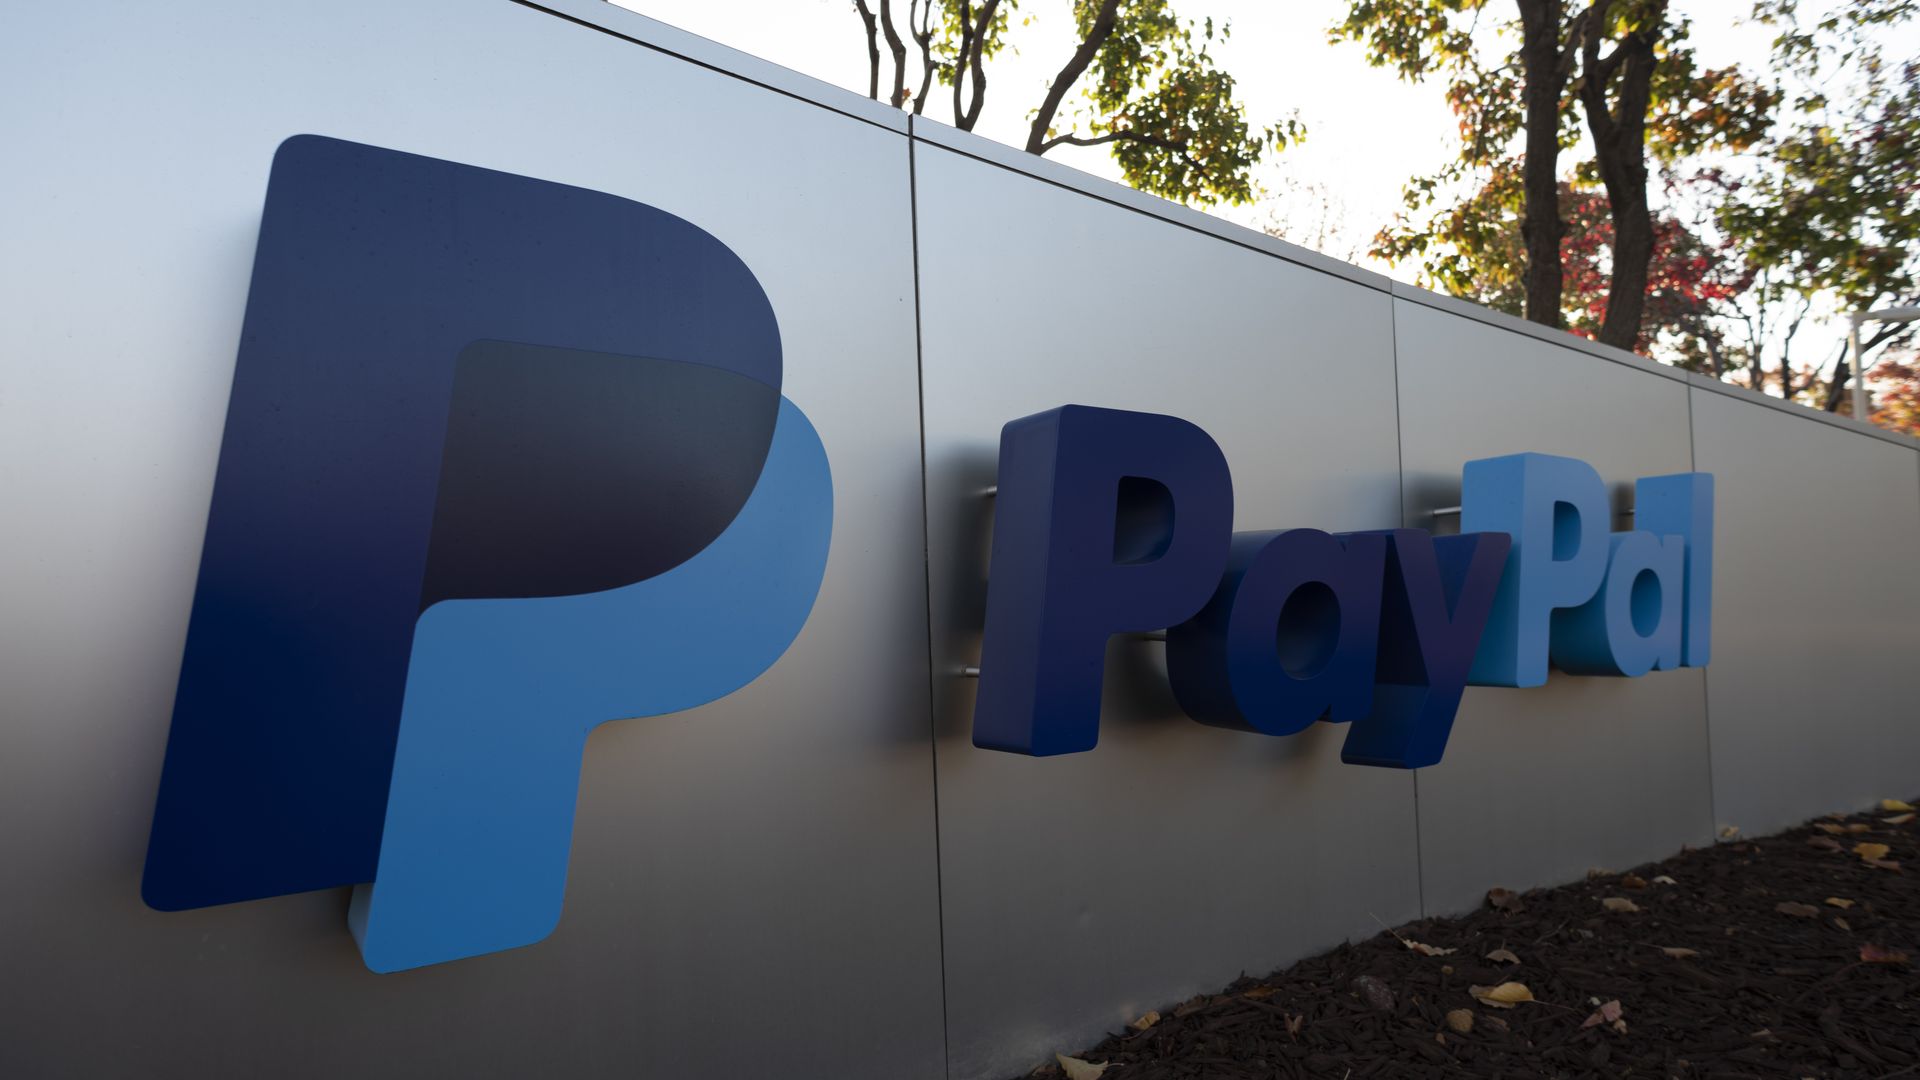 PayPal logo can be seen at its office in San Jose, California, United States on November 23, 2019.